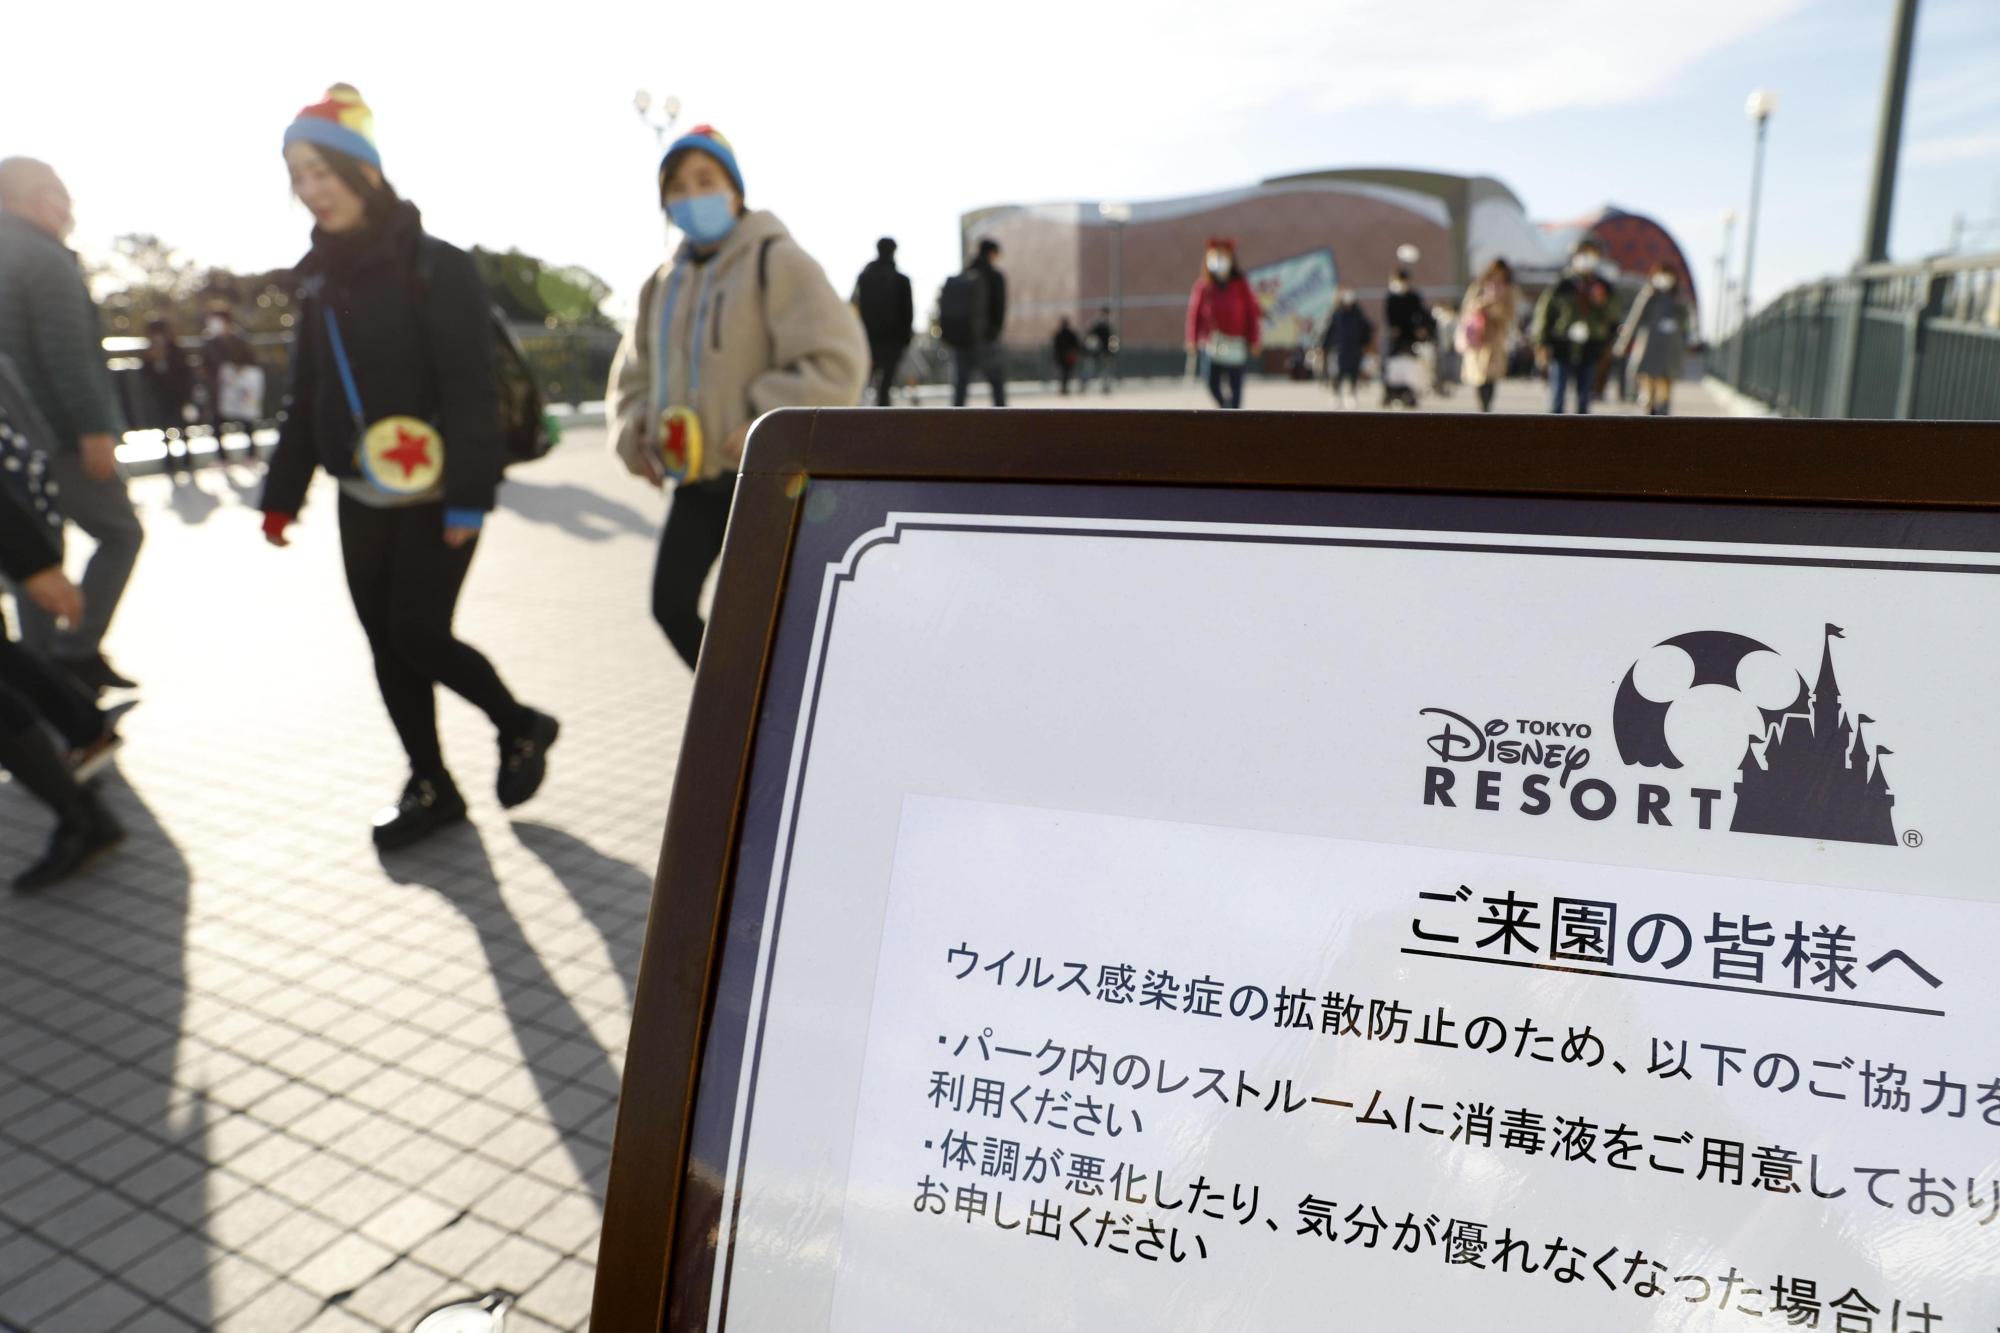 A sign is put up near a train station close to Tokyo Disneyland asking visitors to use hand sanitizer in a photo taken on Feb. 3. The theme park will be closed from Saturday amid the outbreak of COVID-19 infections. | KYODO